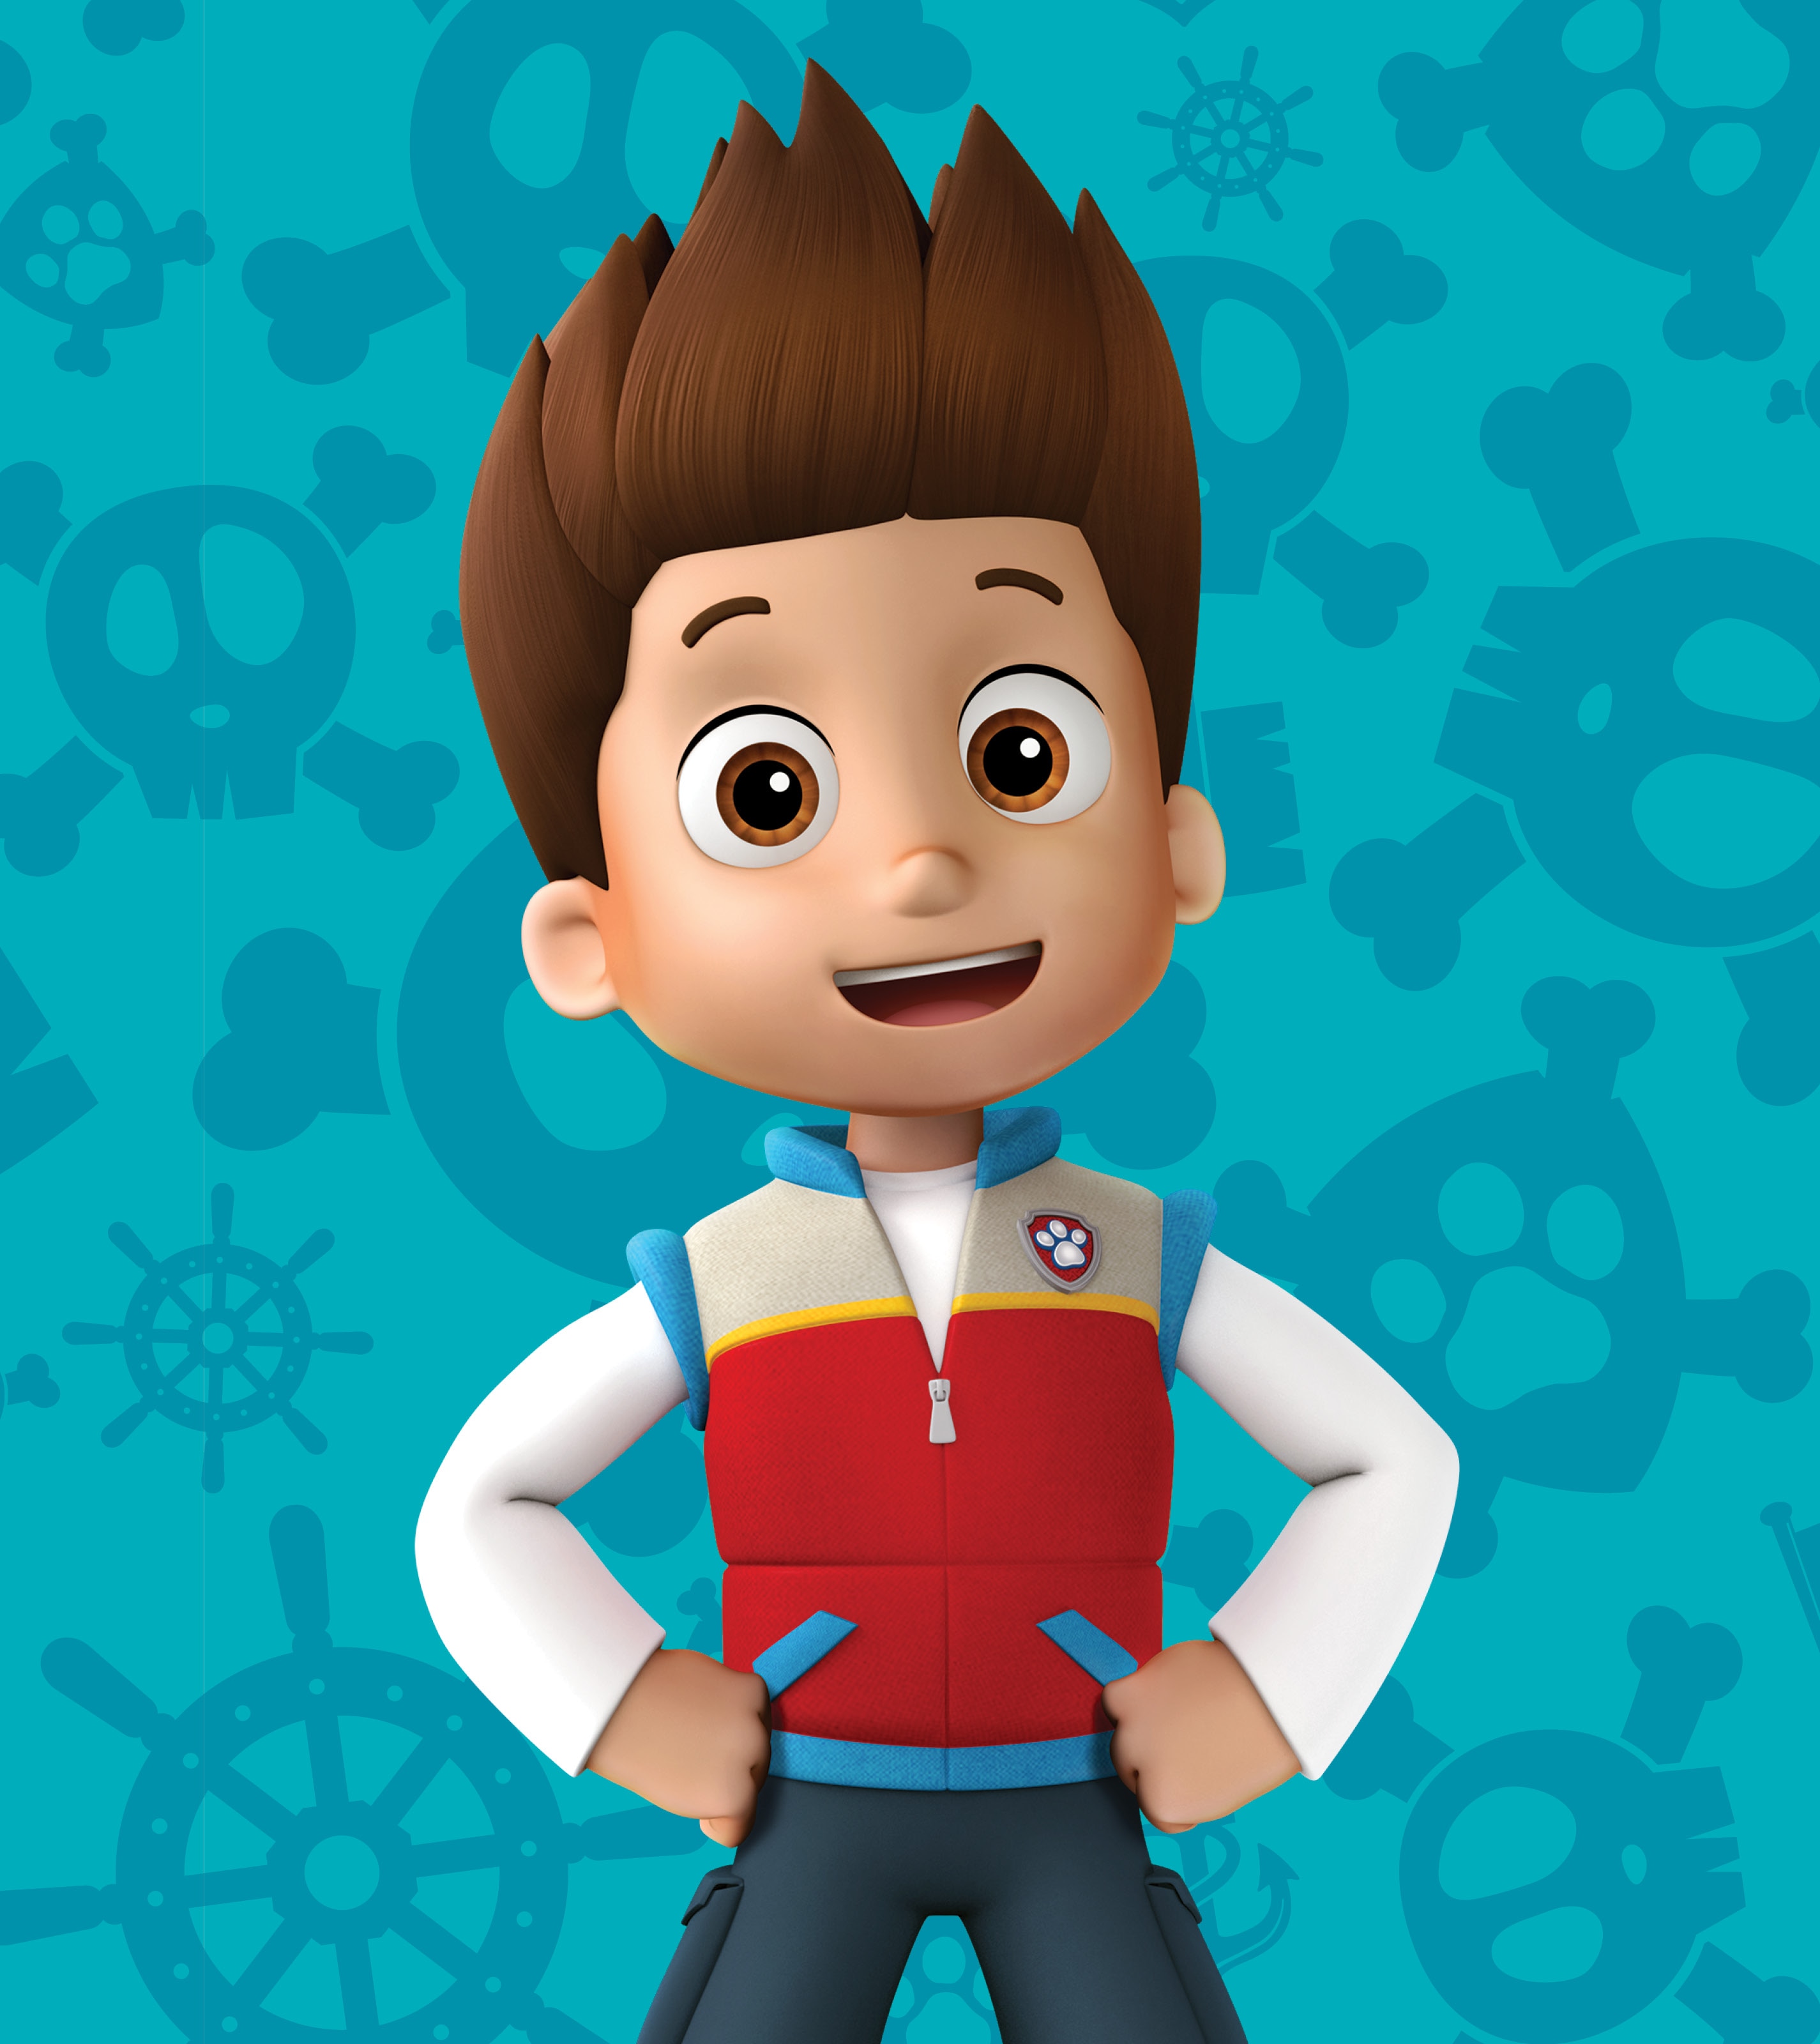 PAW Patrol Live! The Great Pirate Adventure | Show Details, Characters